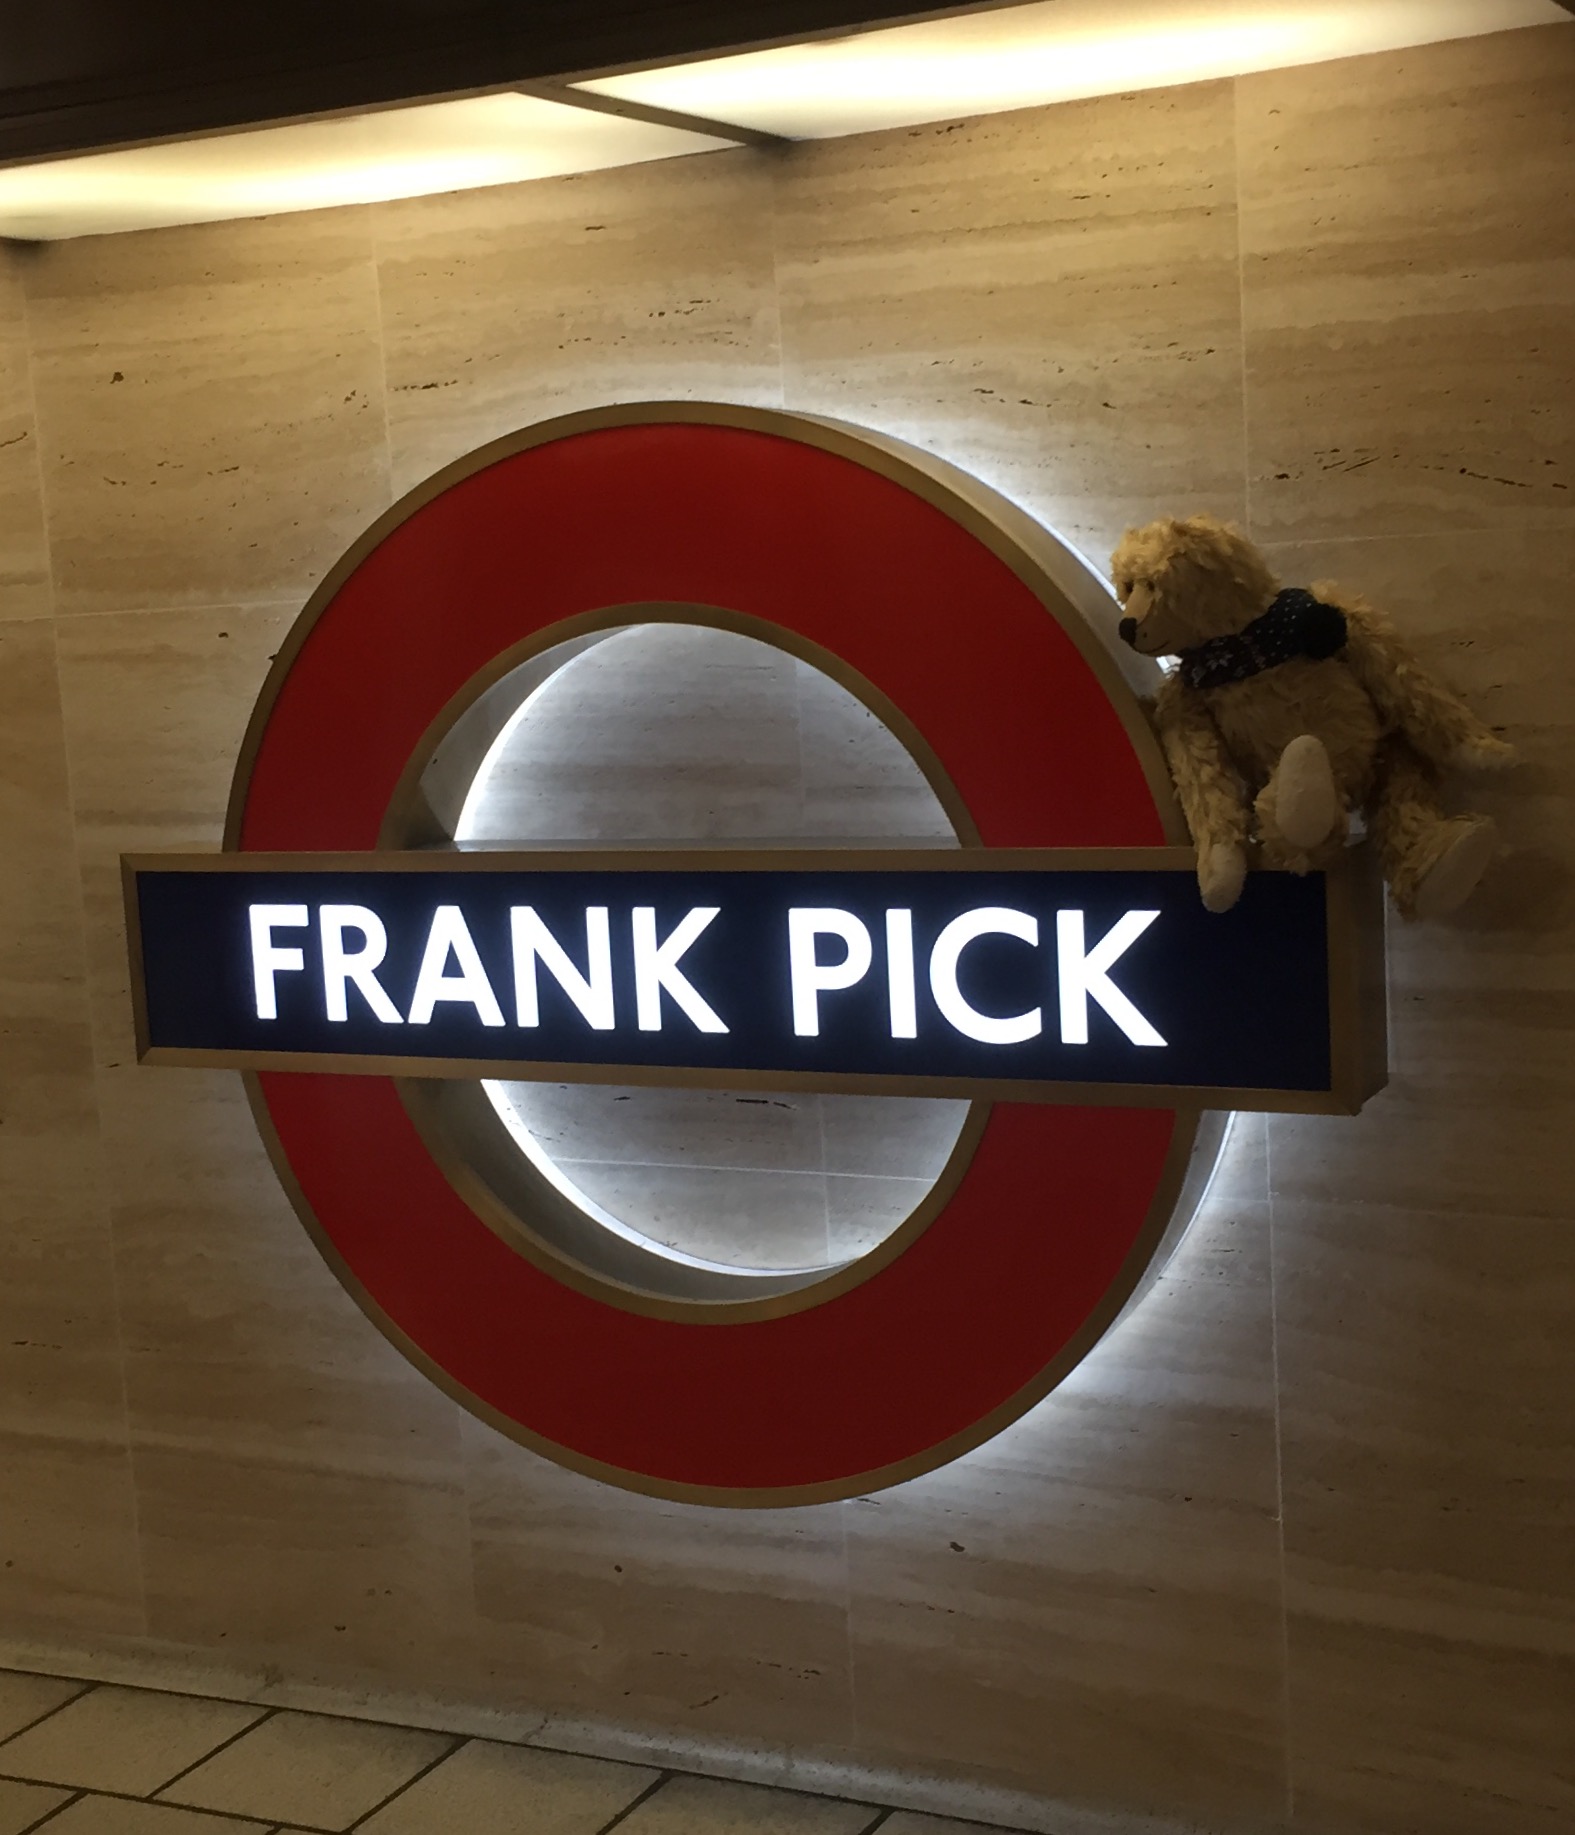 Piccadilly Circus: Frank Pick.